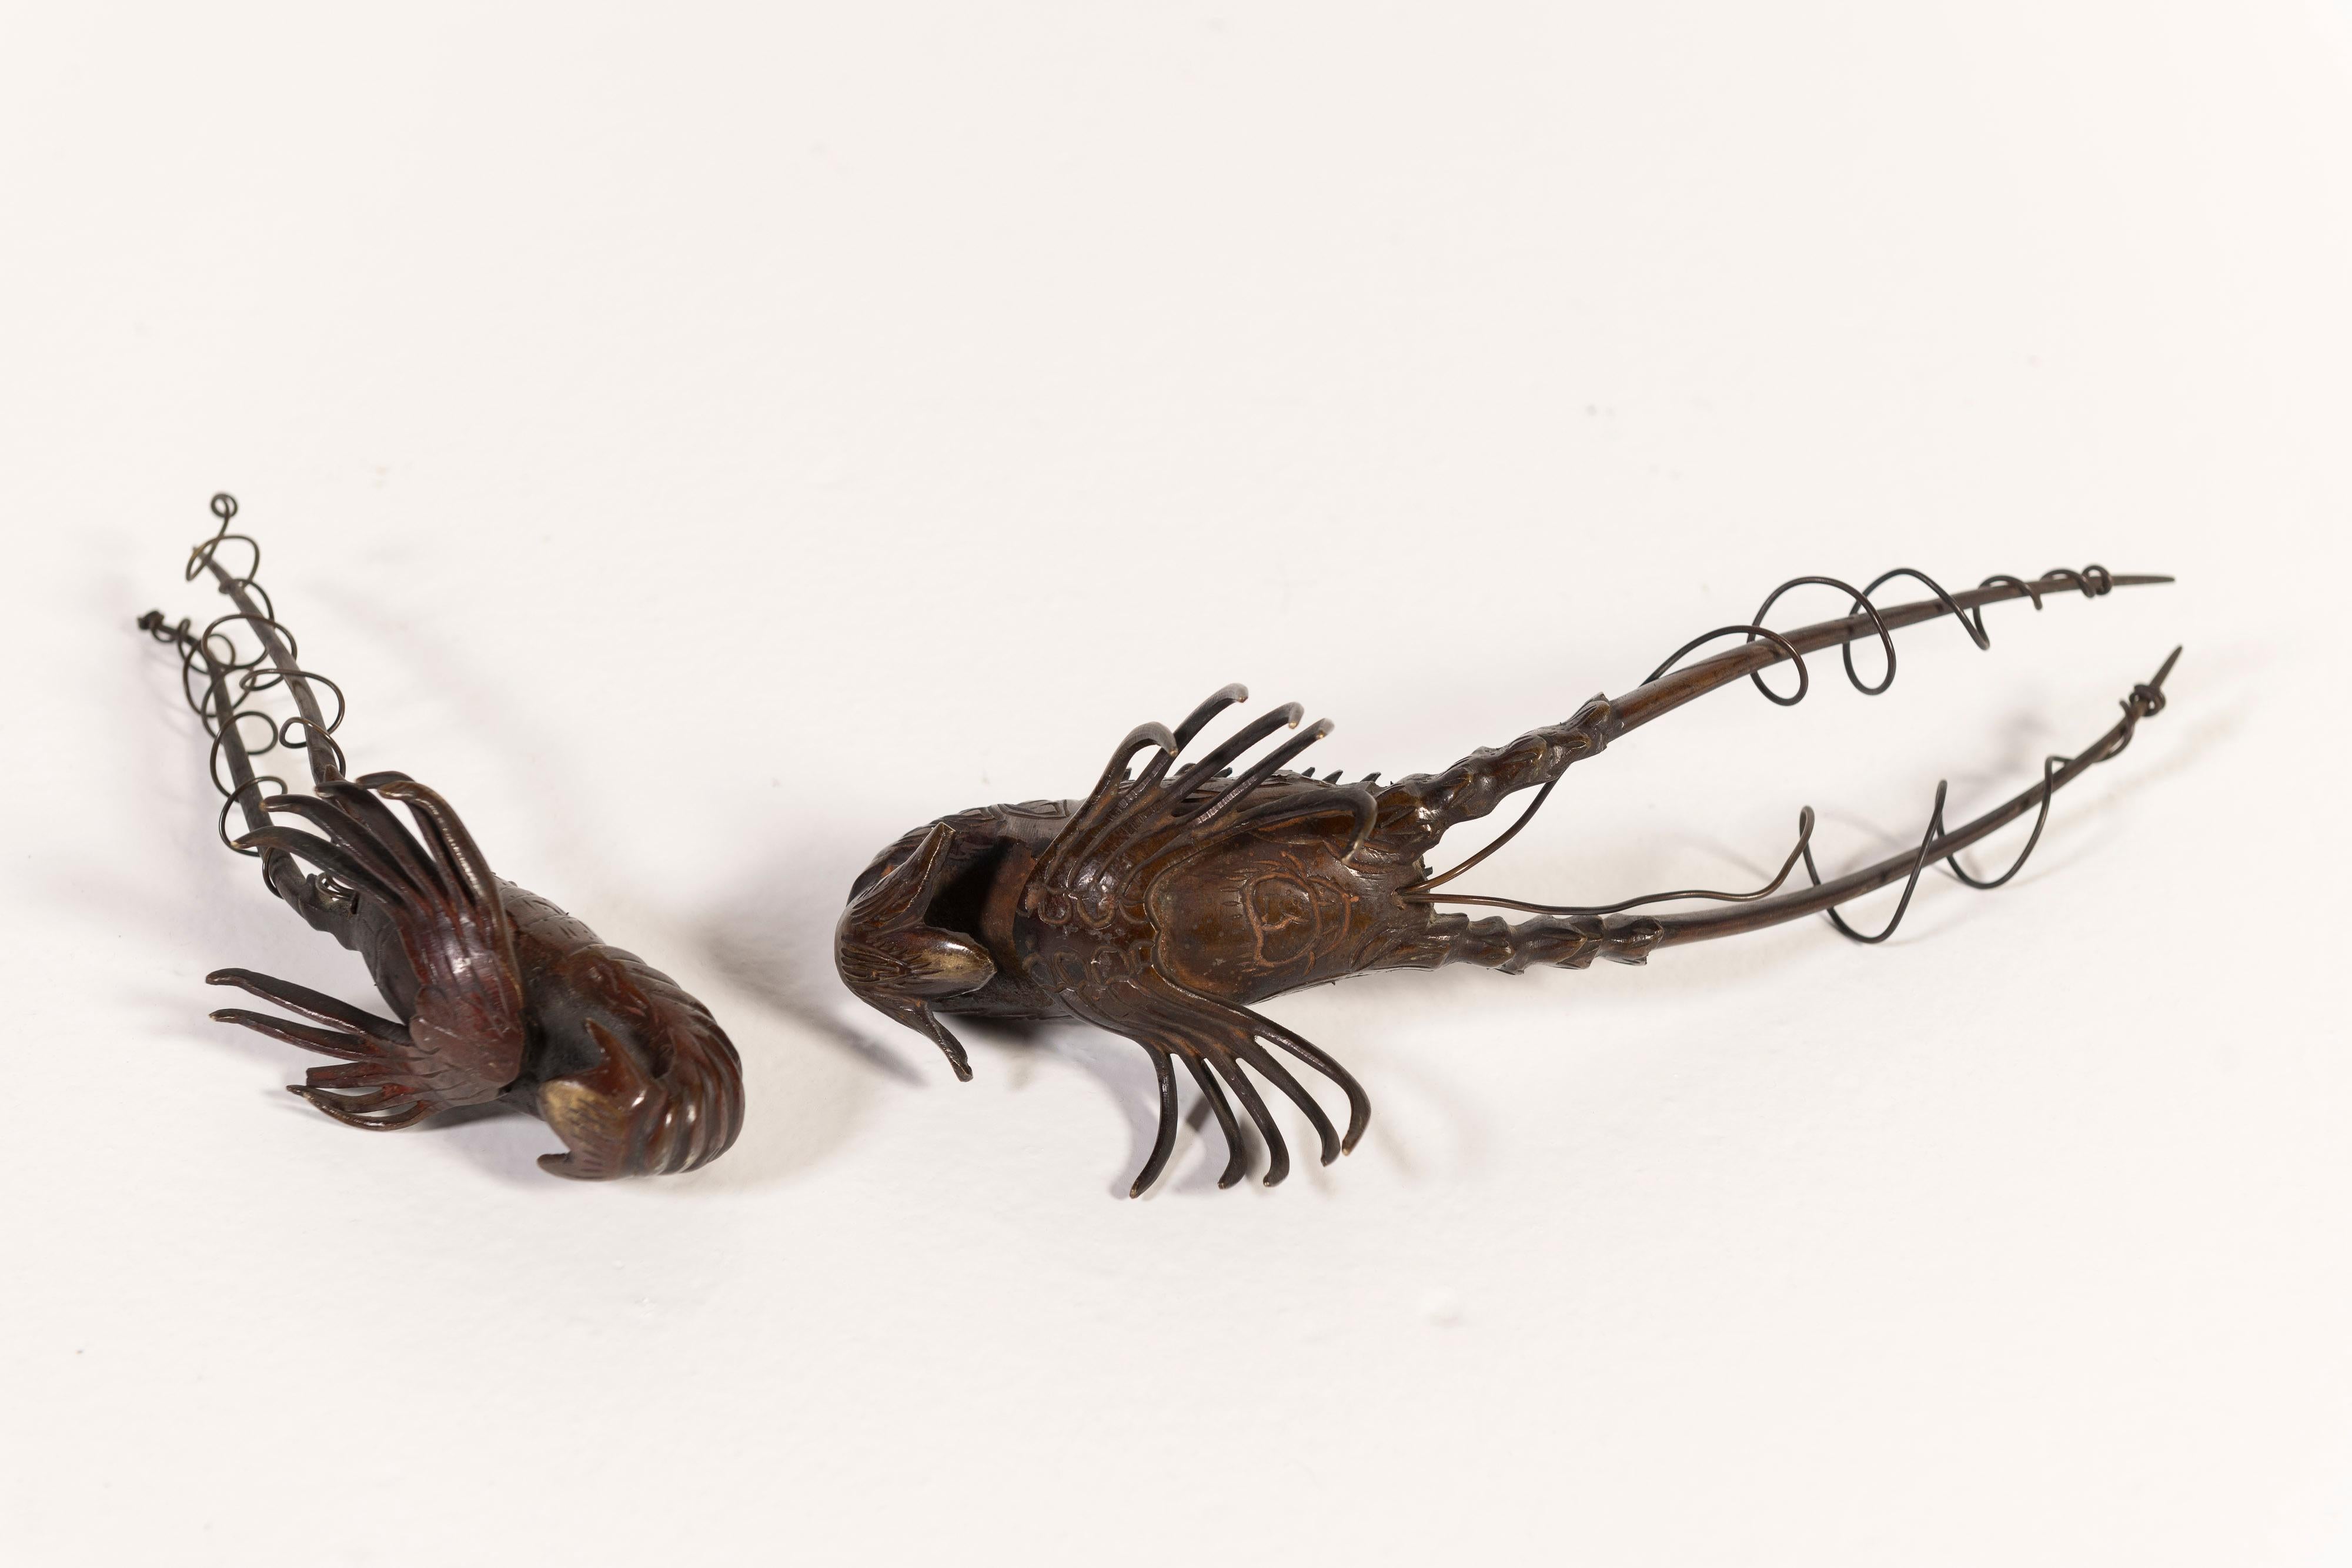 Bronze lobster sculptures, thought to be from 19th Century Japan, are sold as a pair and are unique in size and shape. Two Sizes: Large - 8